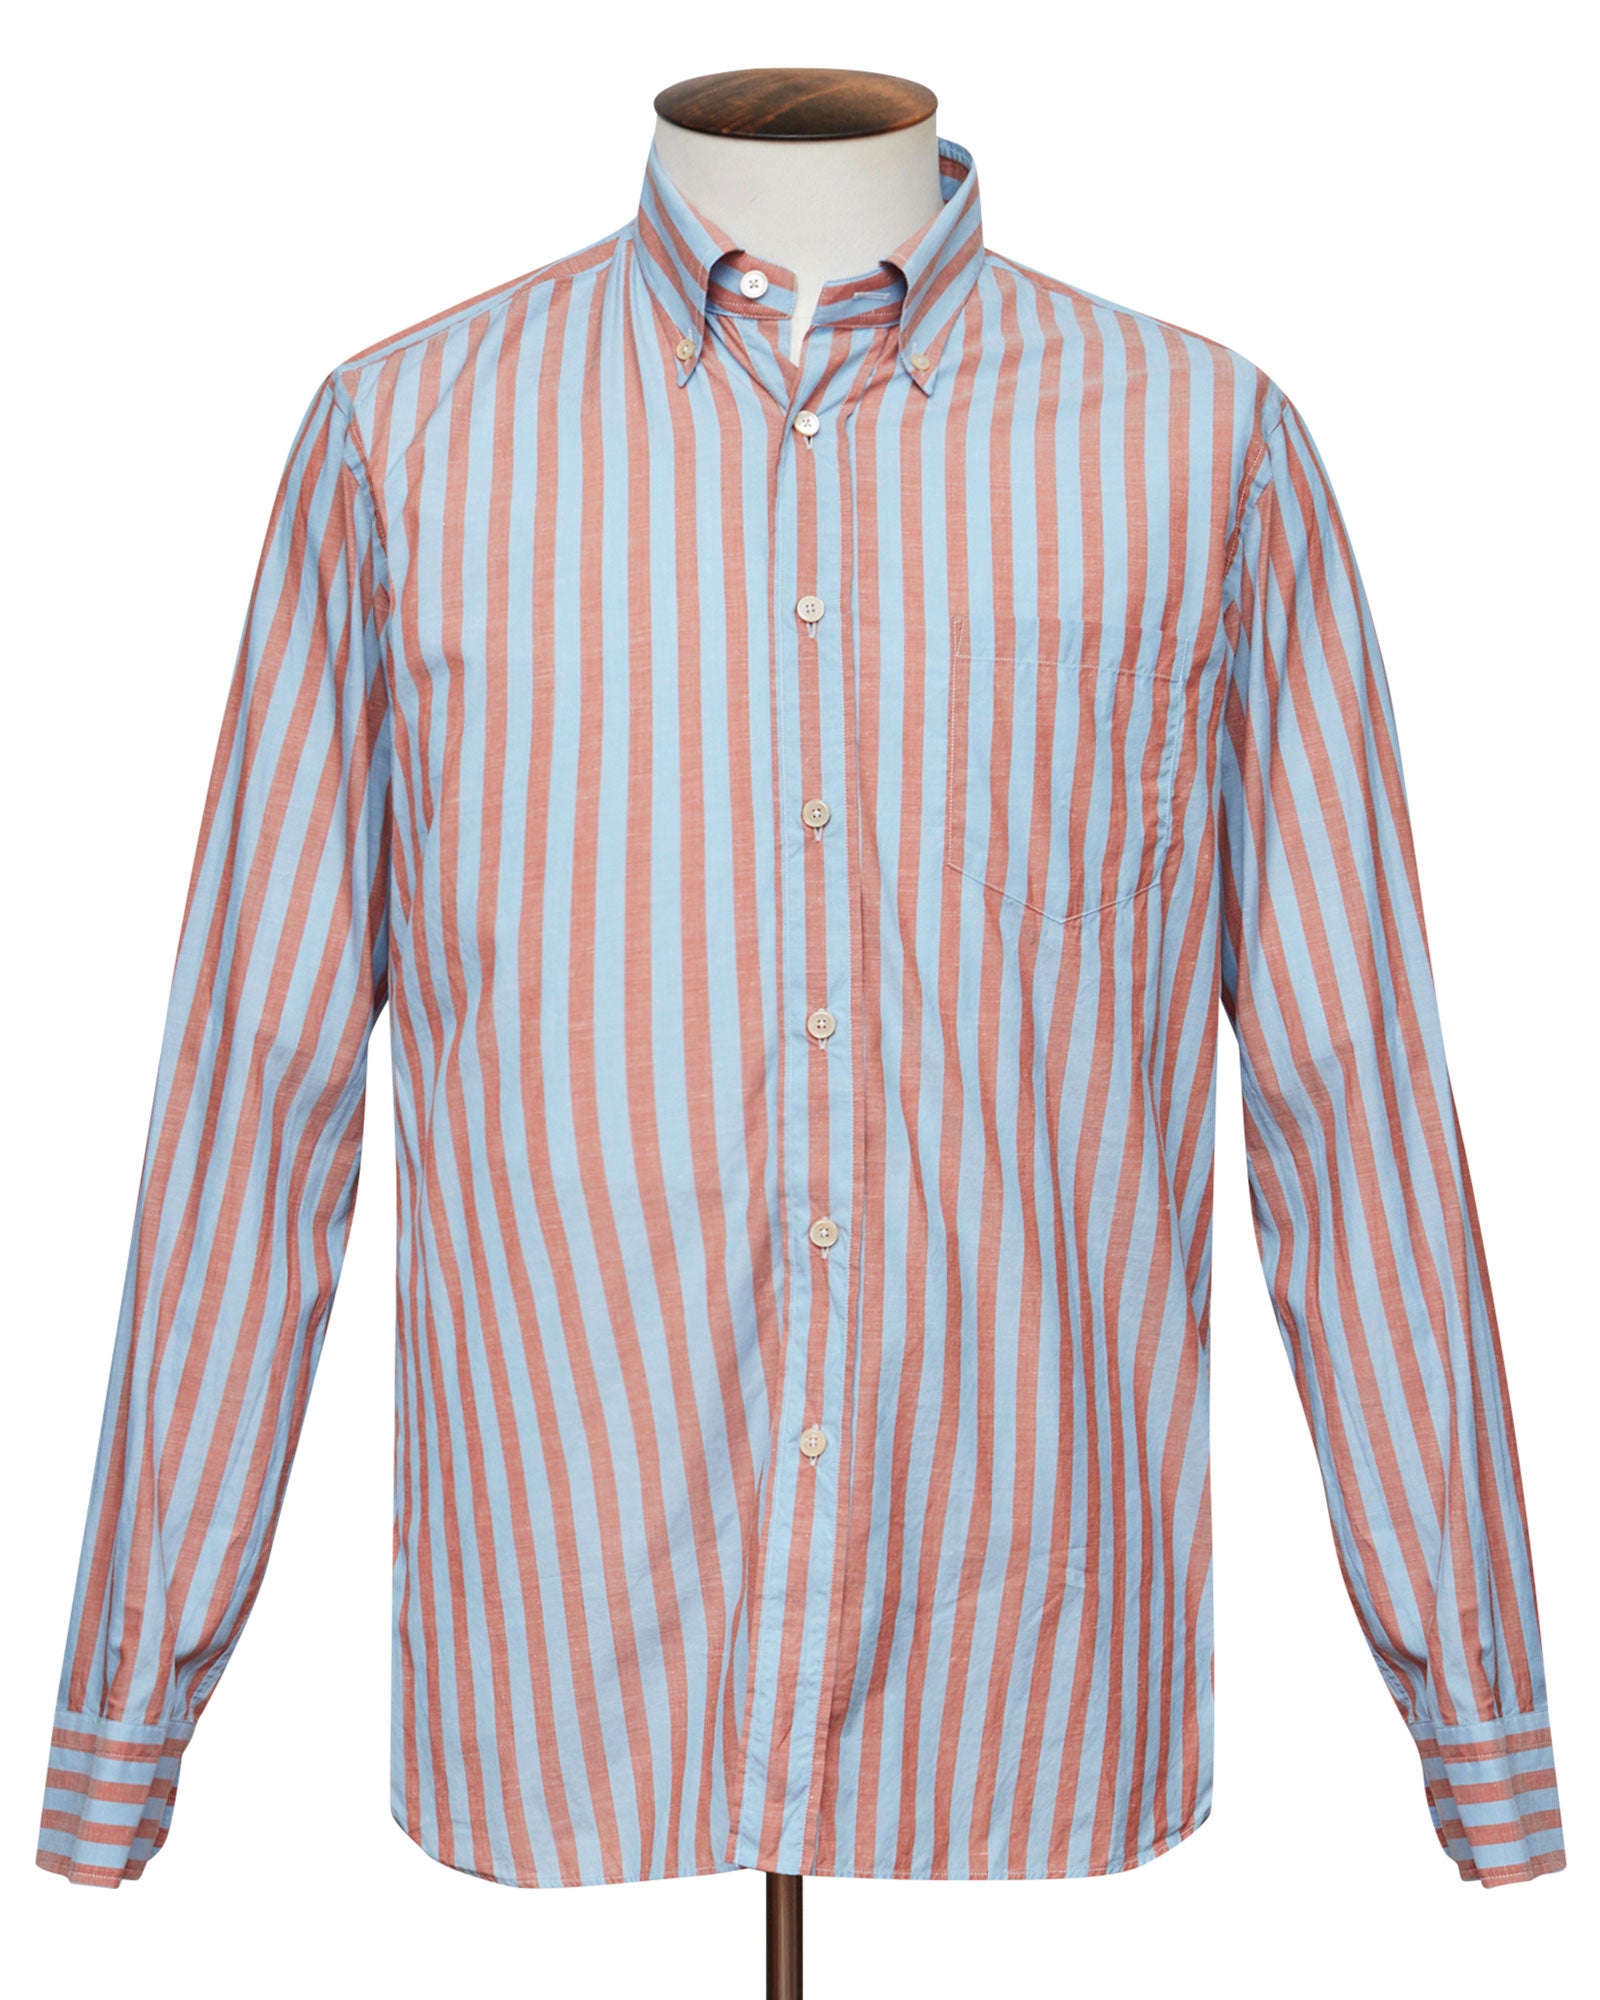 Cerulean Blue and Red Stripe Button Down Shirt